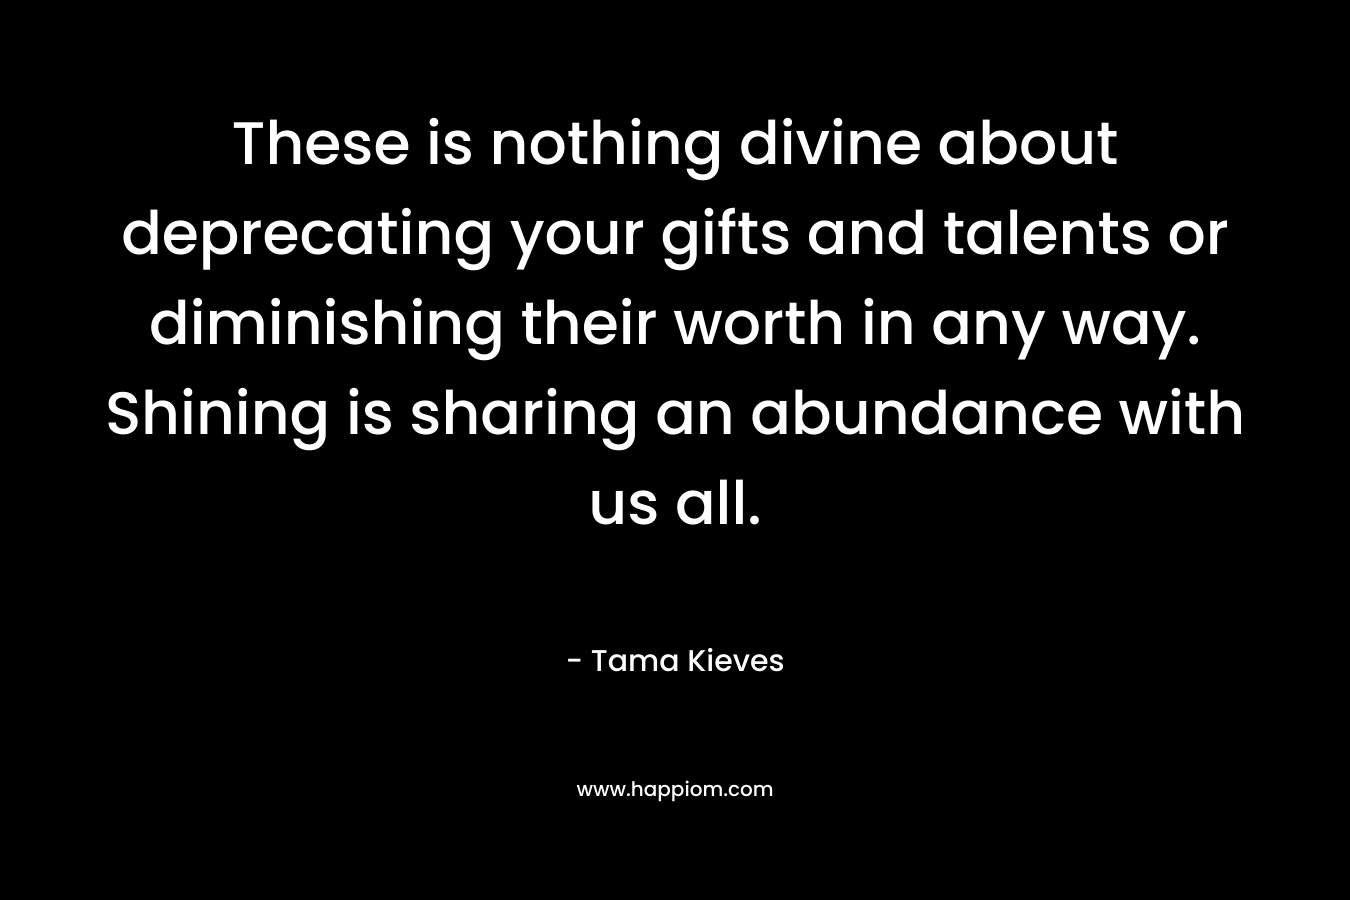 These is nothing divine about deprecating your gifts and talents or diminishing their worth in any way. Shining is sharing an abundance with us all. – Tama Kieves